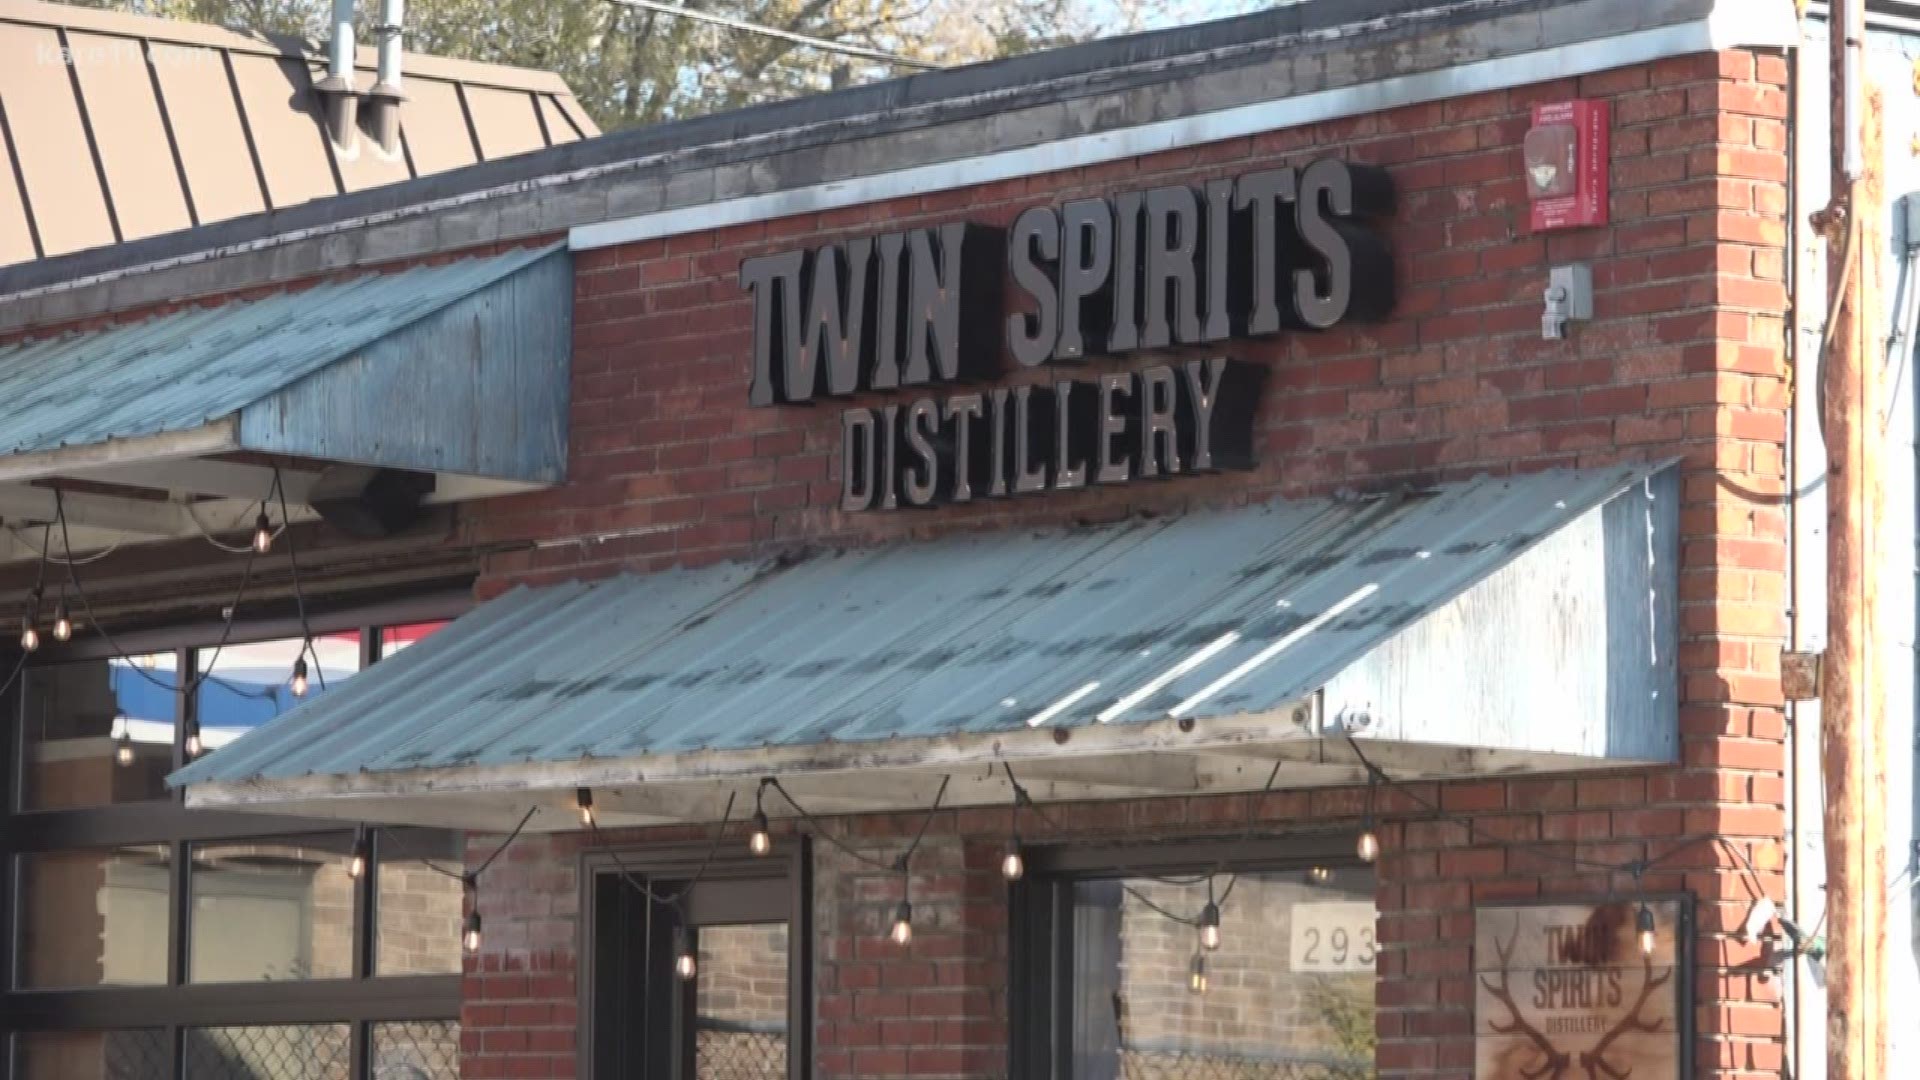 Michelle Winchester turned 50 and decided she wanted to do something different. That 'different' turned out to be Twin Spirits Distillery.